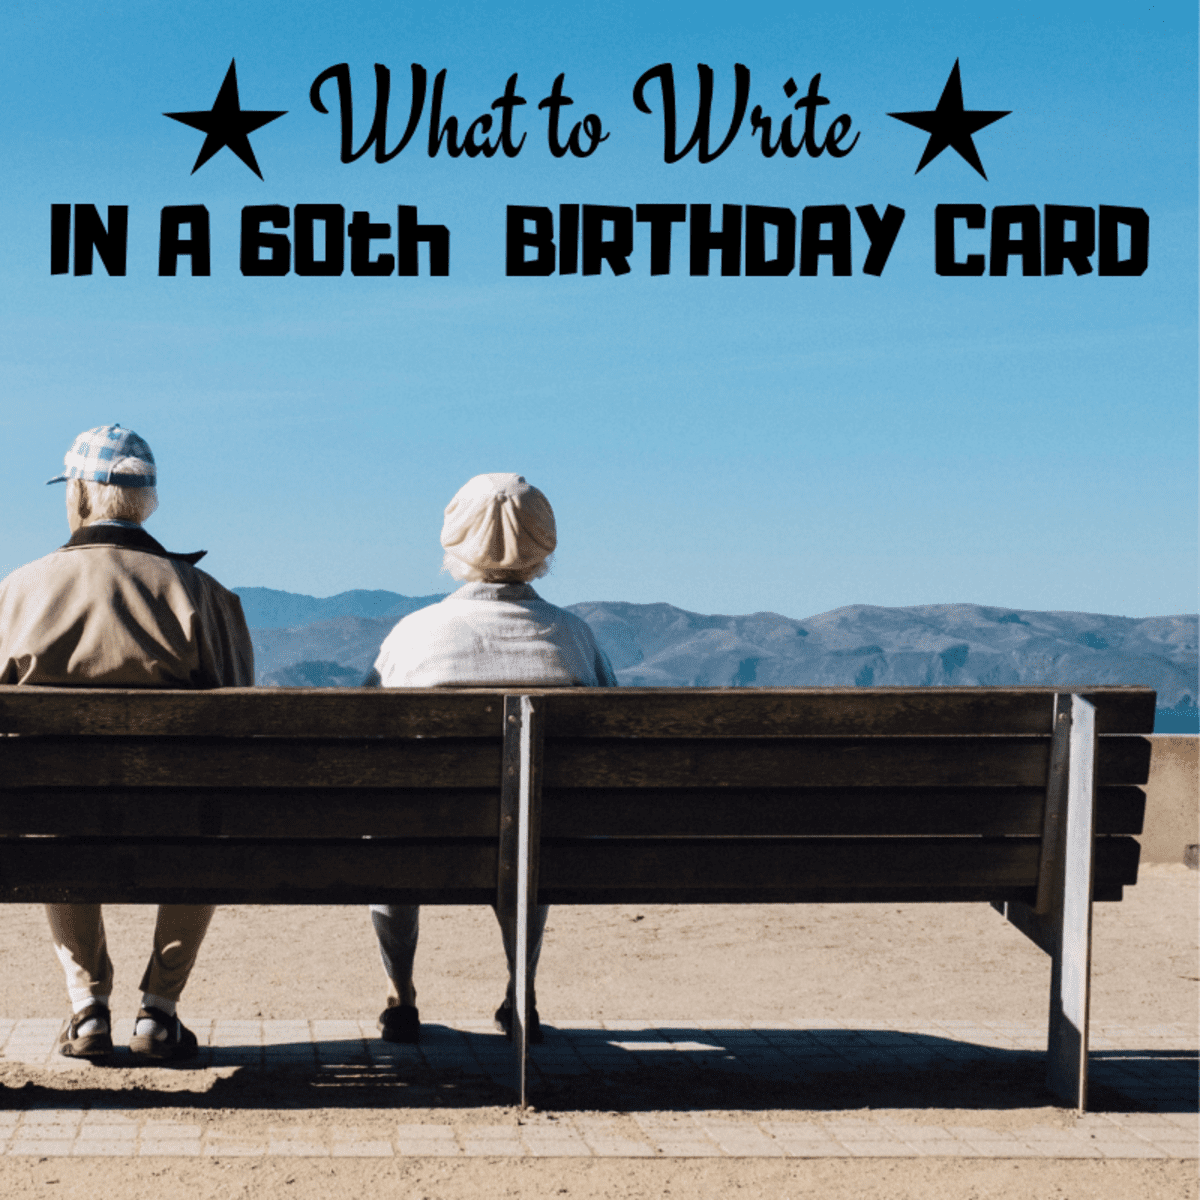 60th Birthday Card Messages, Wishes, Sayings, and Poems - Holidappy